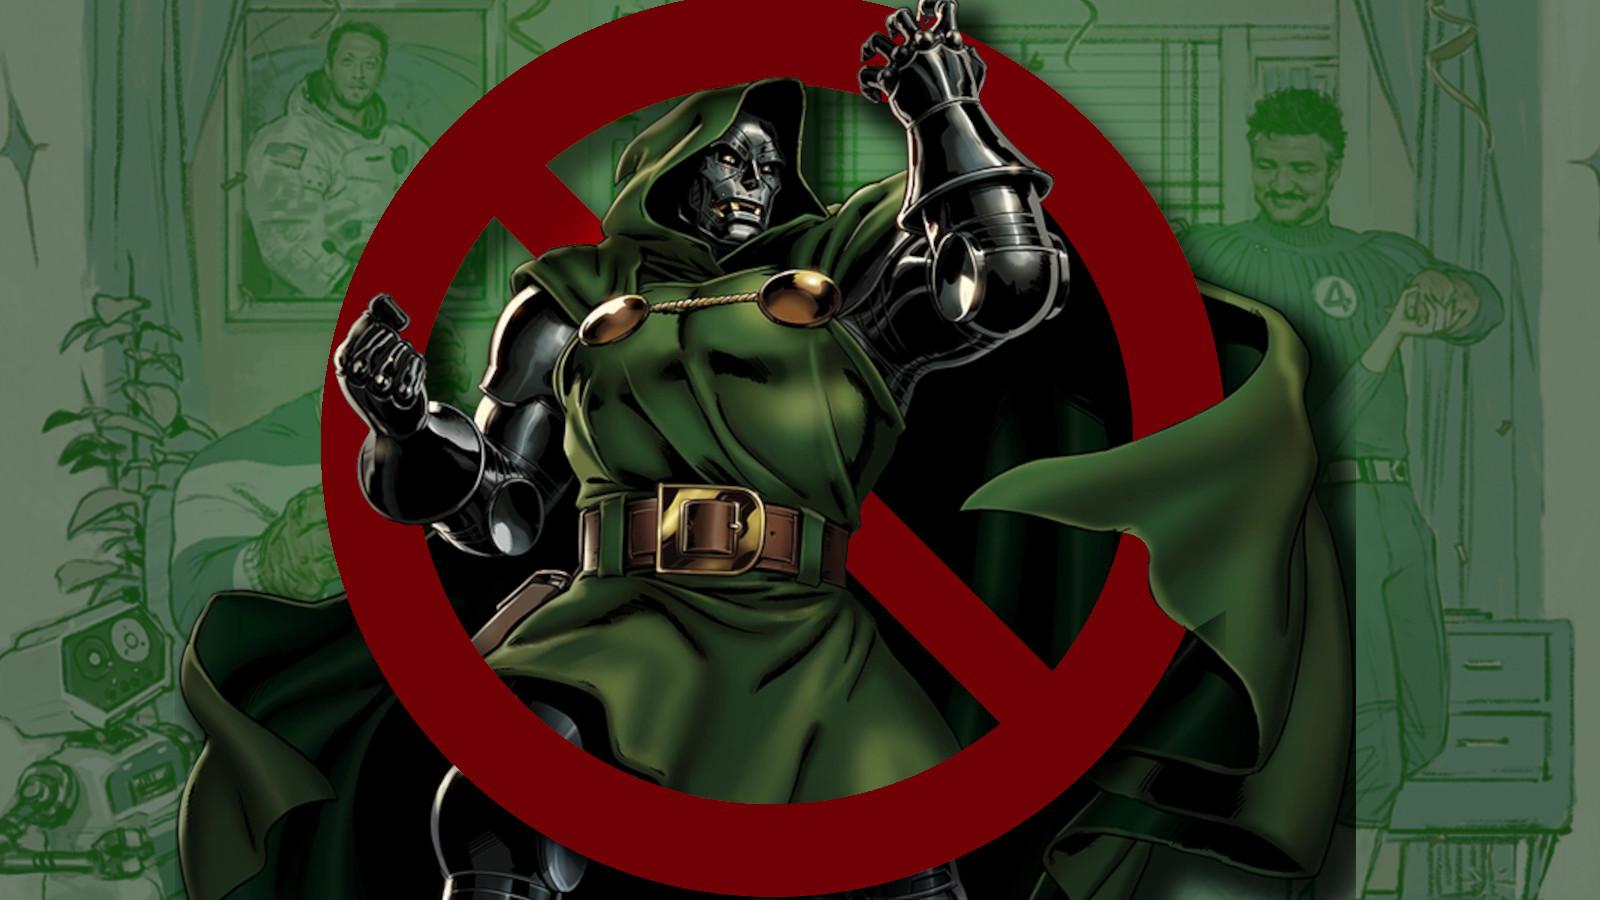 Doctor Doom with Marvel's Fantastic Four in the background.